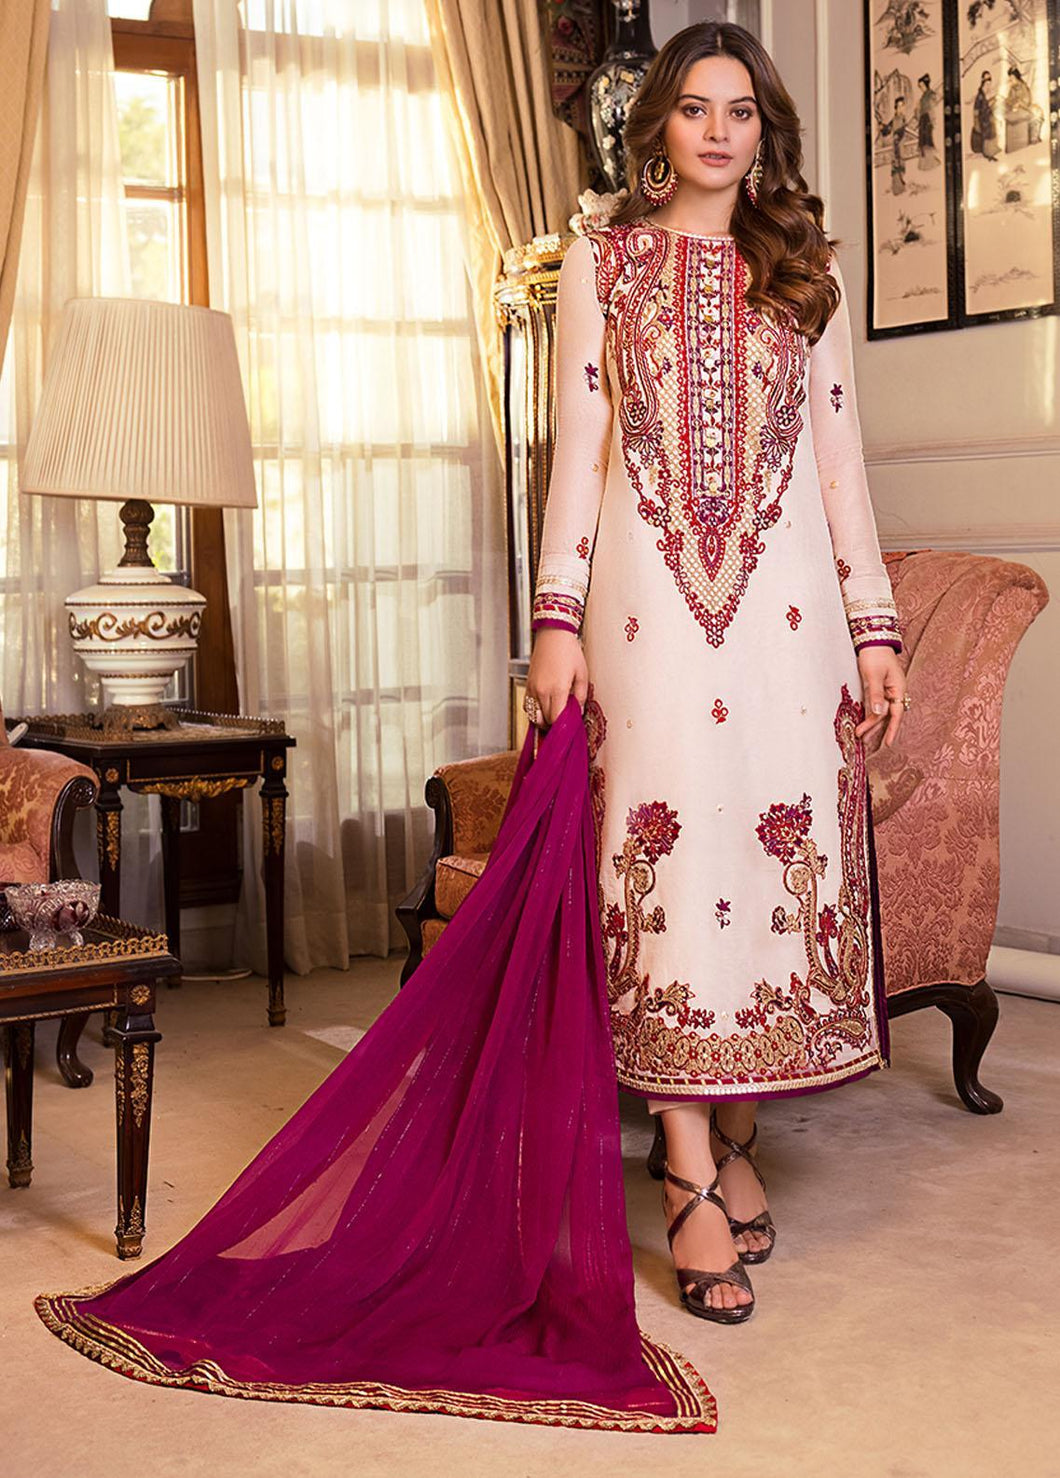 Buy ASIM JOFA | MAAHRU AND NOORIE '23 beige exclusive slik collection of ASIM JOFA WEDDING COLLECTION 2023 from our website. We have various PAKISTANI DRESSES ONLINE IN UK, ASIM JOFA CHIFFON COLLECTION 2021. Get your unstitched or customized PAKISATNI BOUTIQUE IN UK, USA, FRACE , QATAR, DUBAI from Lebaasonline at SALE!